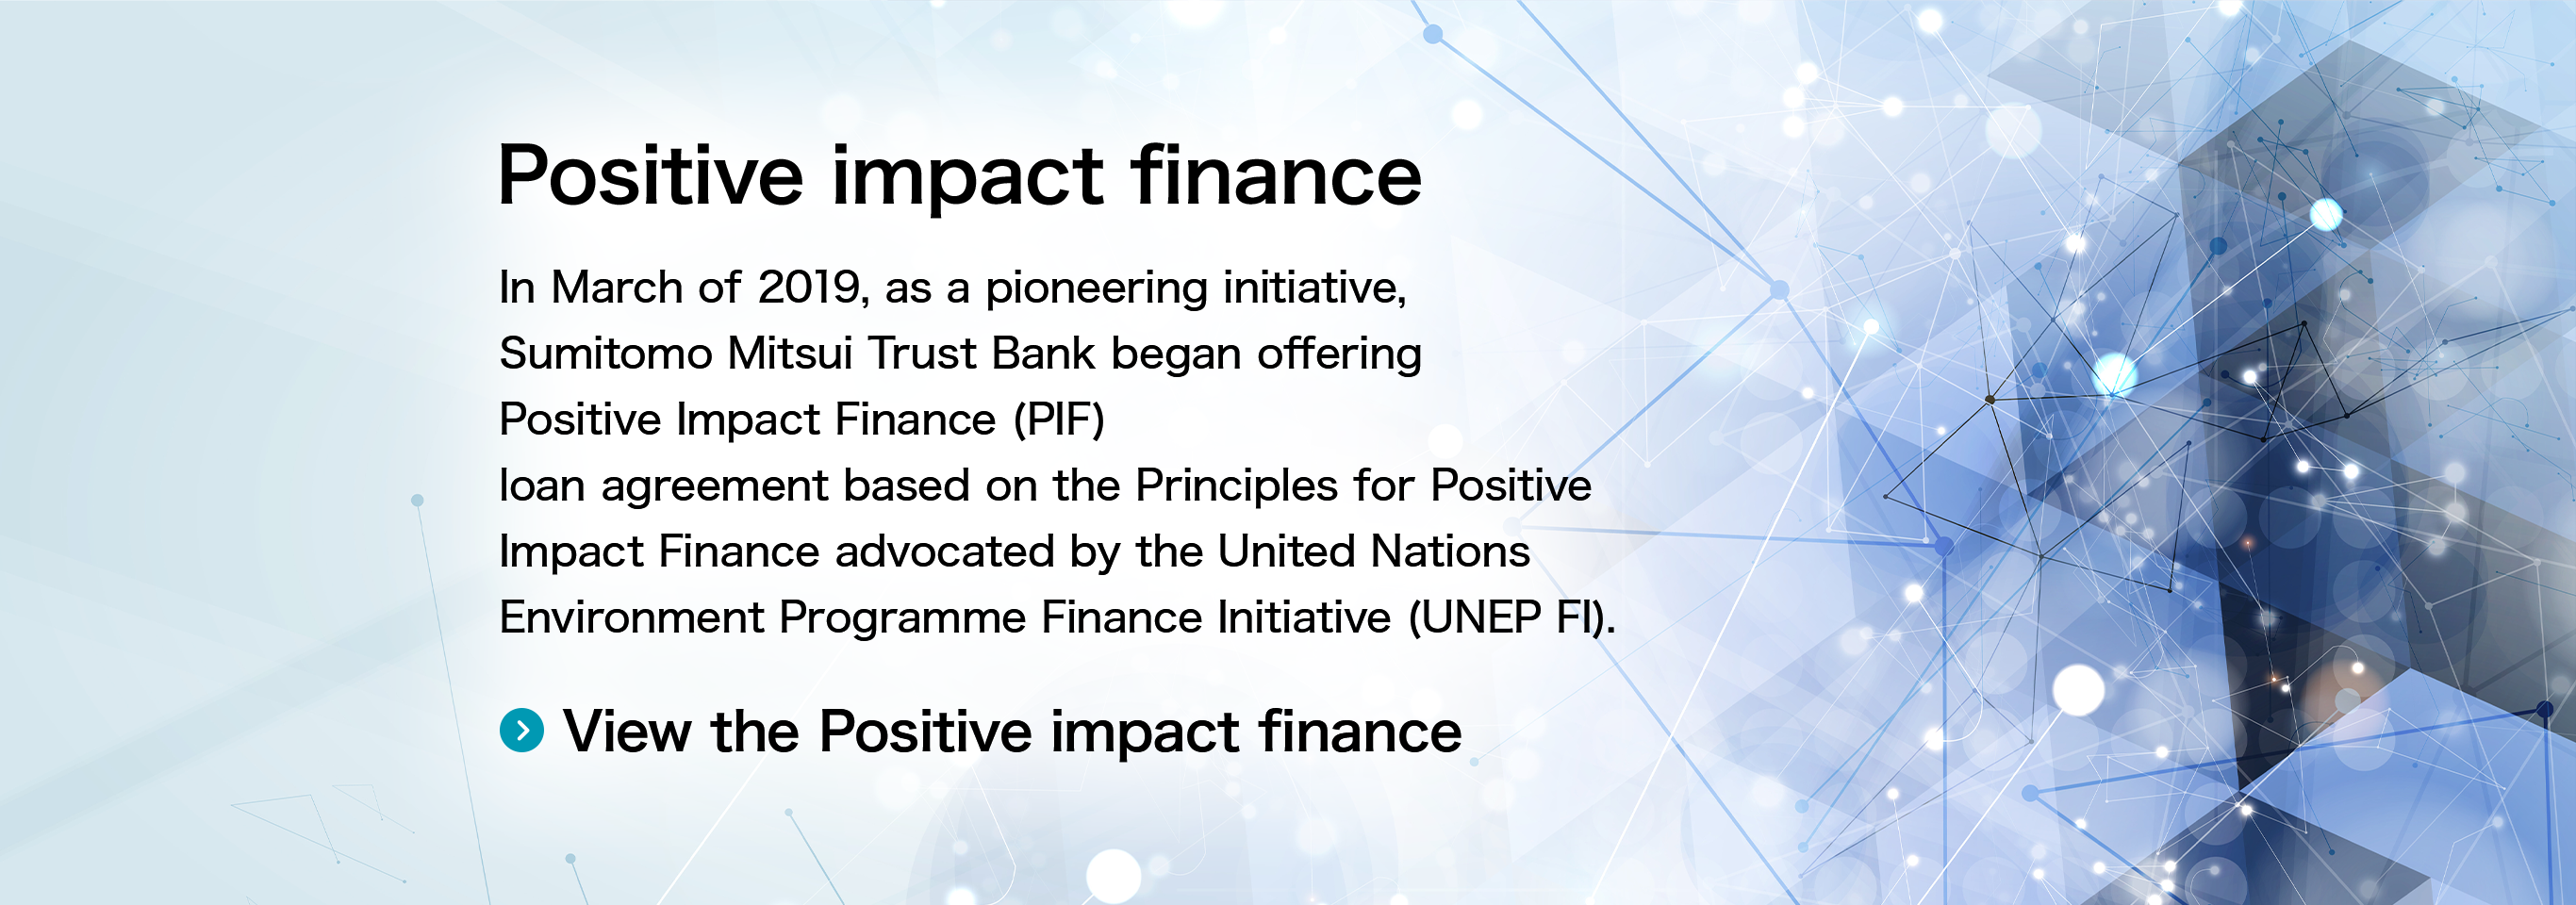 Positive impact finance In March of 2019, Sumitomo Mitsui Trust Bank began offering the world’s first Positive Impact Finance (PIF) loan agreement based on the Principles for Positive Impact Finance advocated by the United Nations Environment Programme Finance Initiative (UNEP FI). View the Positive impact finance